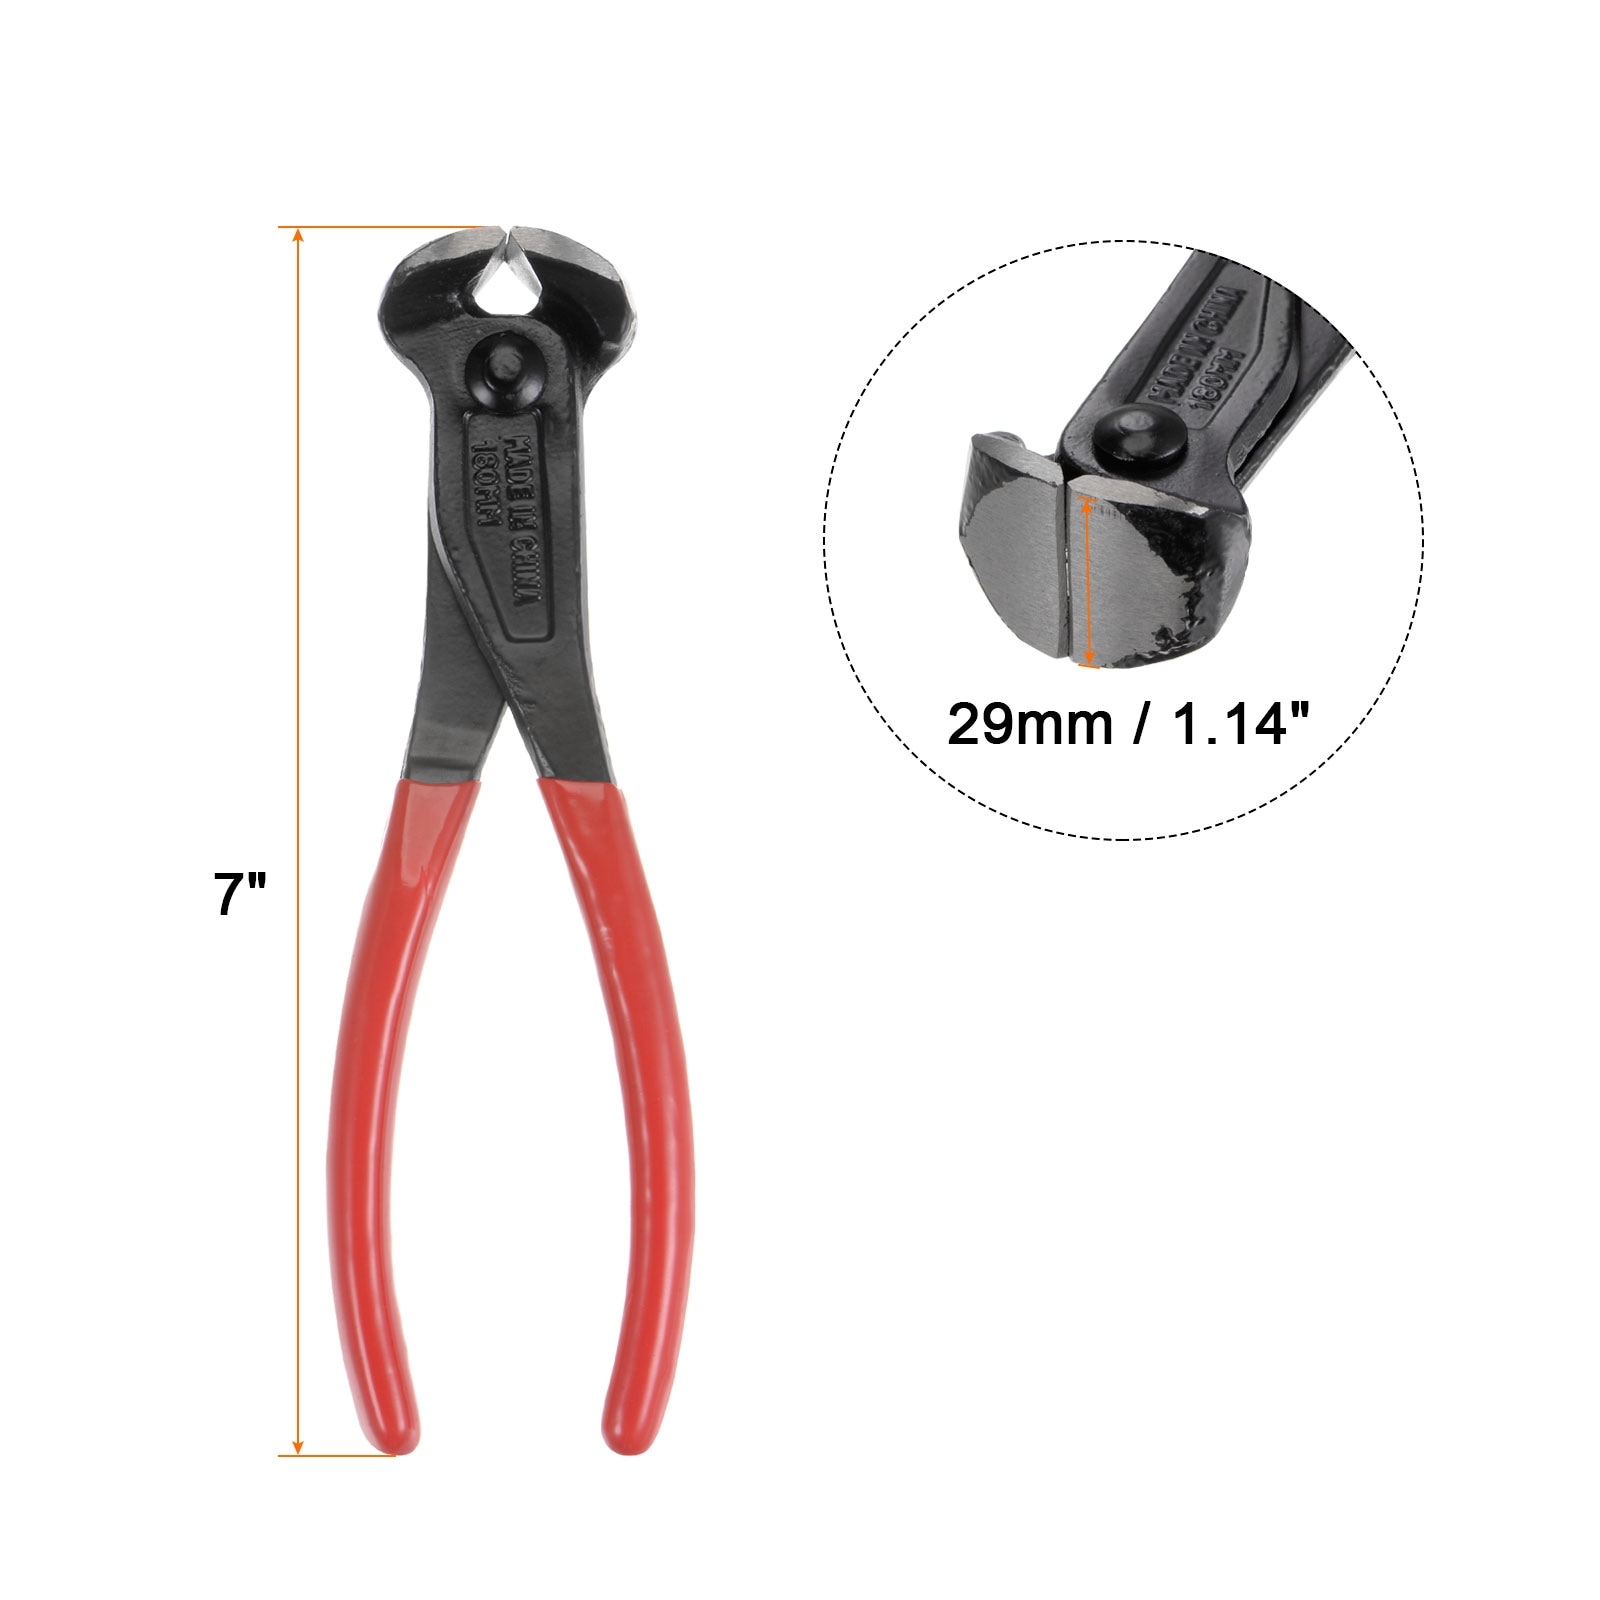 End Cutting Pliers 7 Nail Nippers Puller Plier with PVC Handle - Black Red - 7 inch